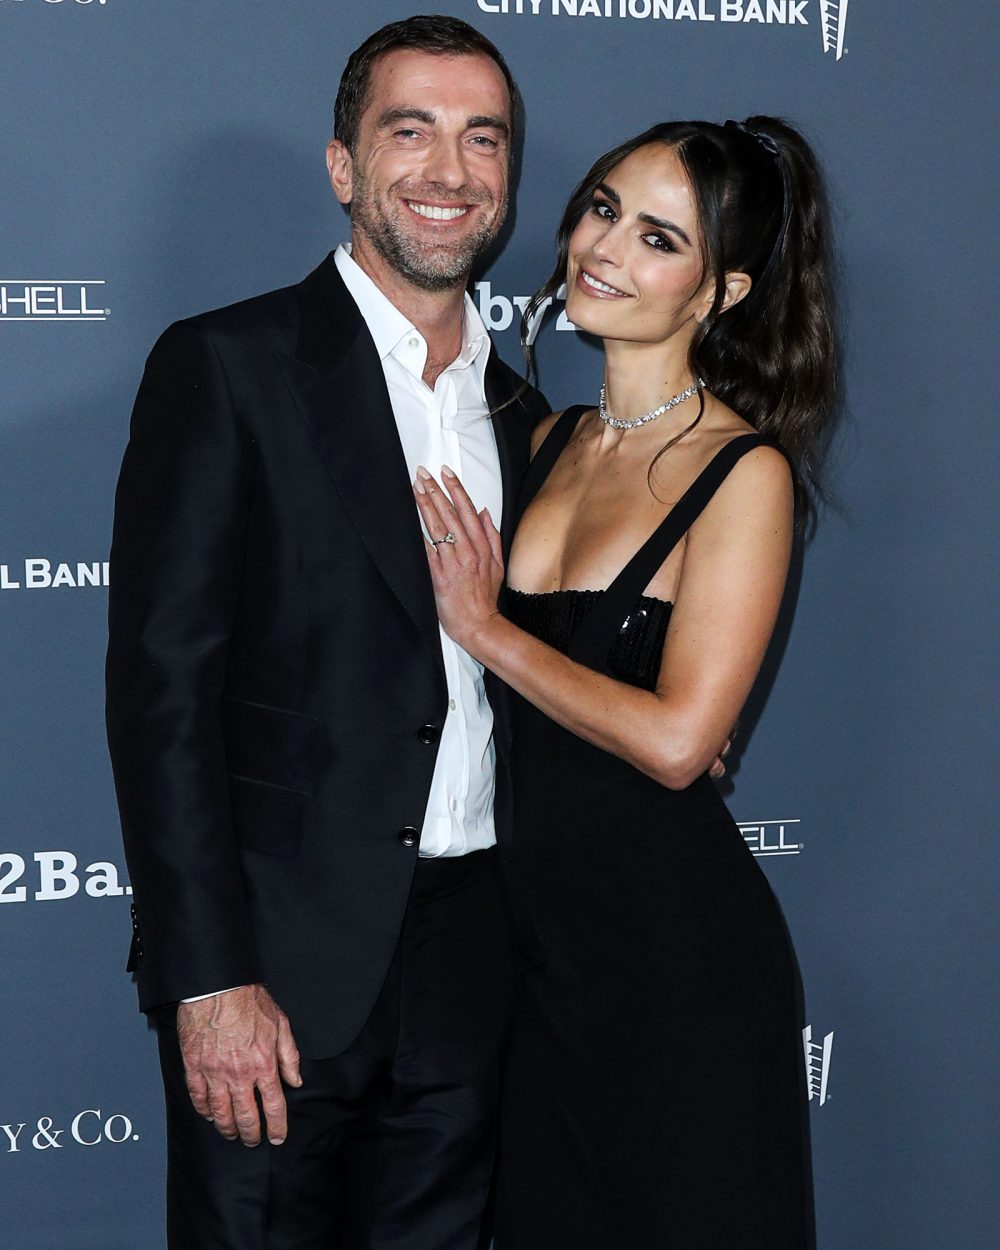 Jordana Brewster Marries Mason Morfit After 1-Year Engagement — With a 'Fast & the Furious' Nod